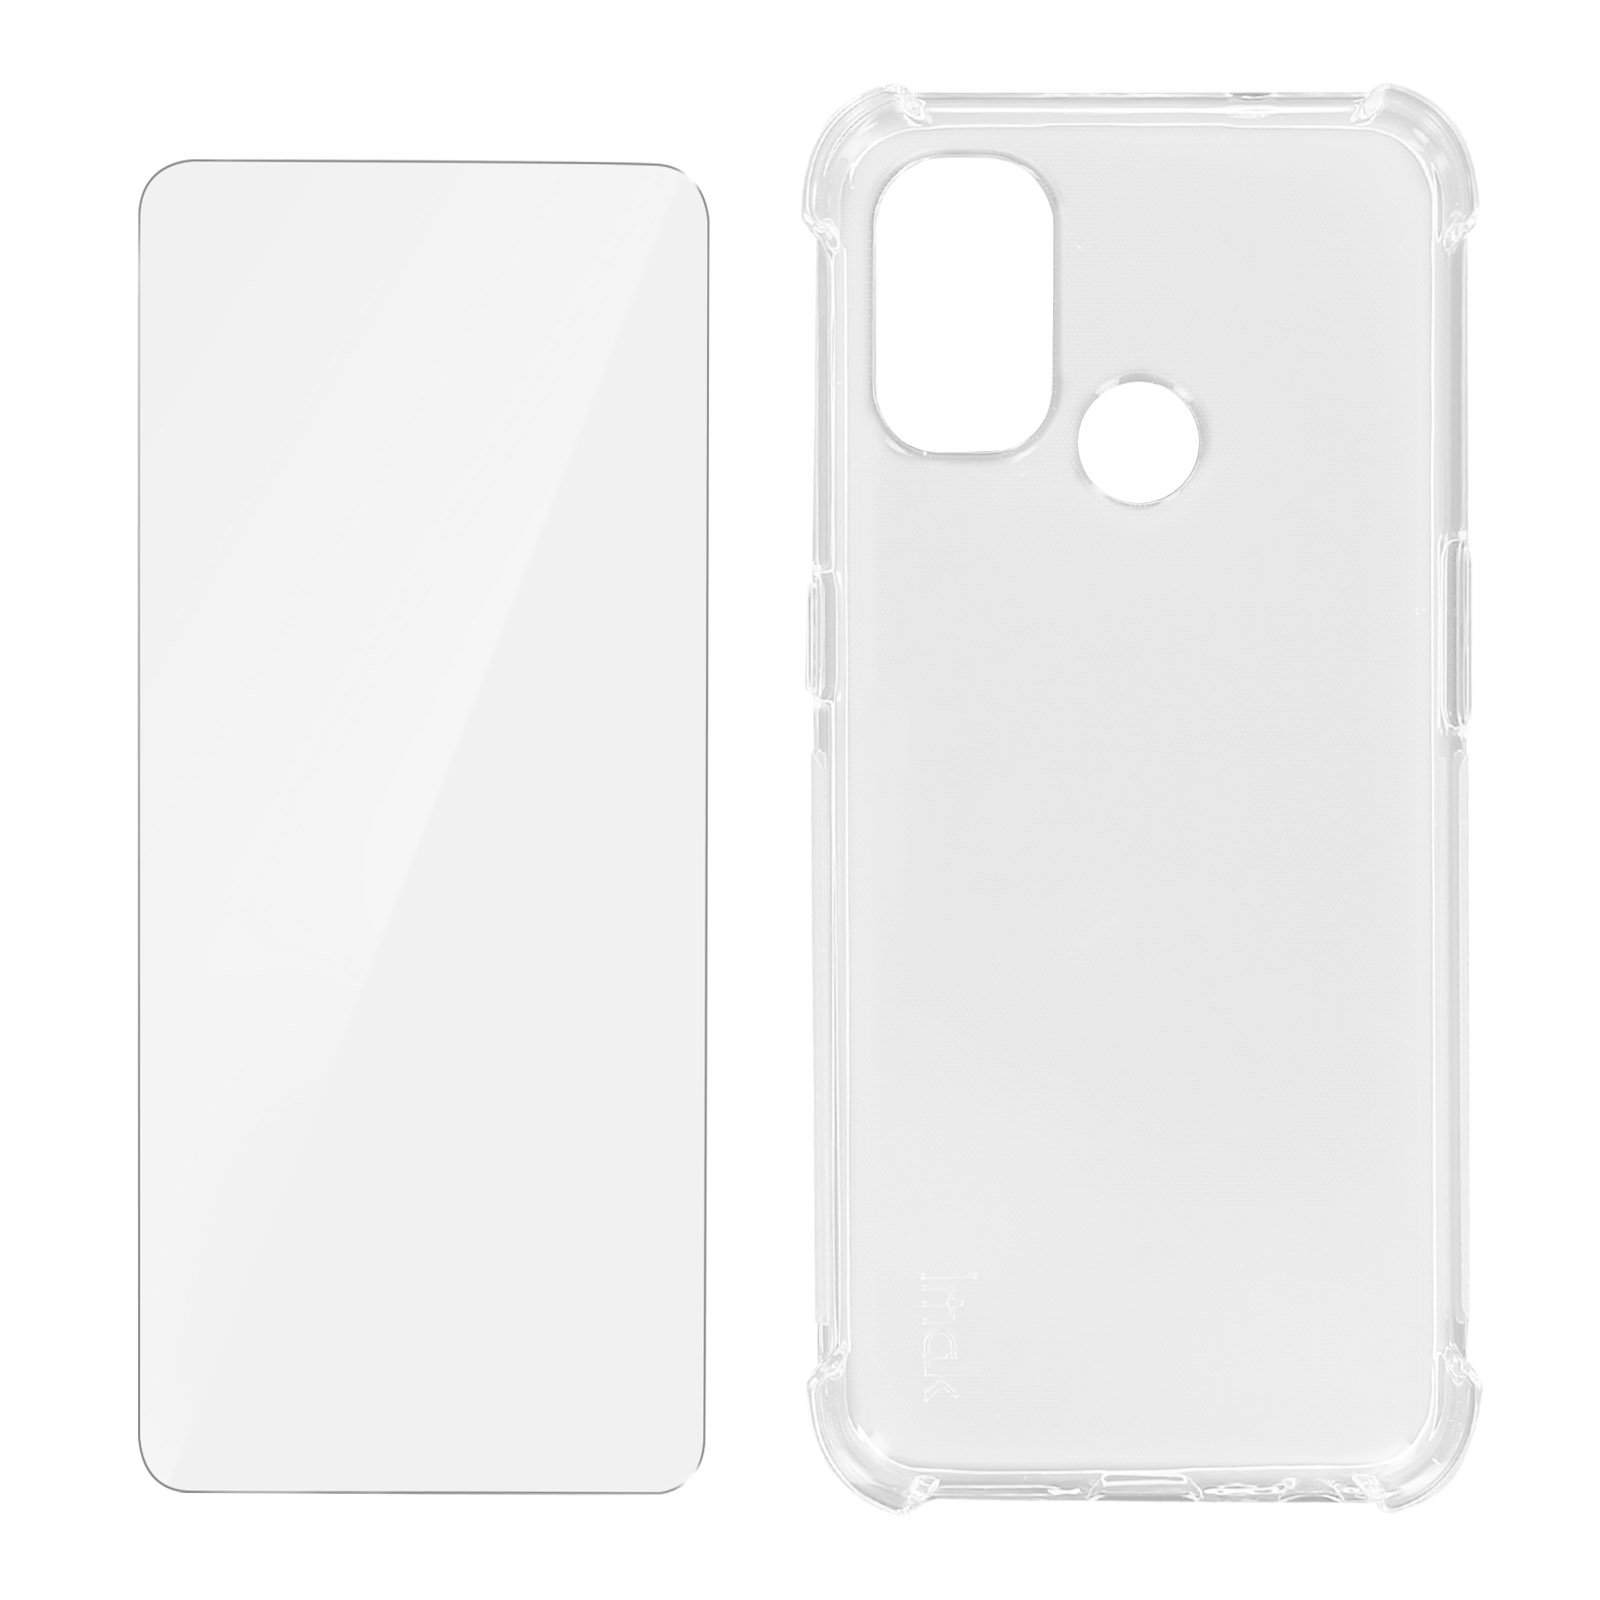 Set N100, Backcover, IMAK Transparent Series, Nord OnePlus,